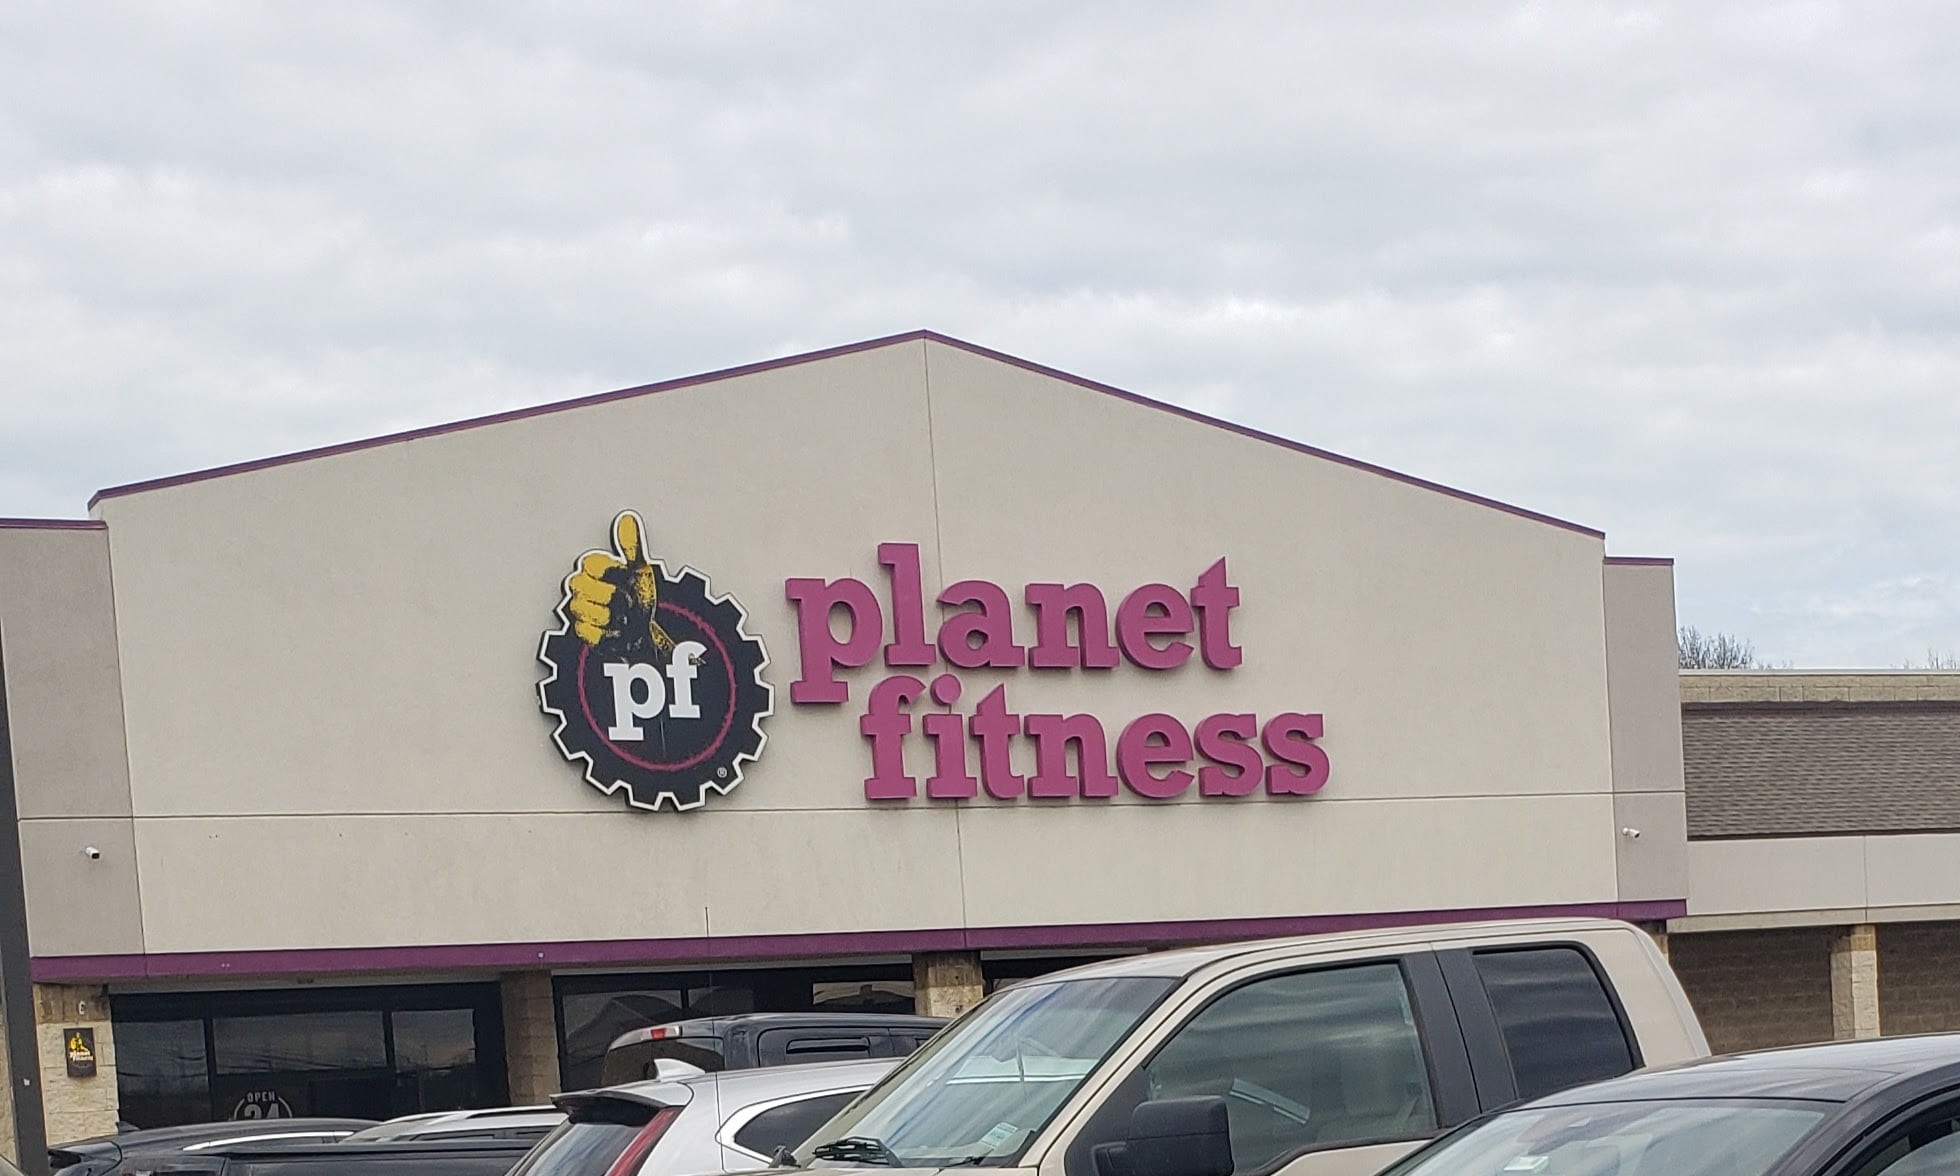 Planet Fitness - Lorain (OH 44053), US, muscles of the body